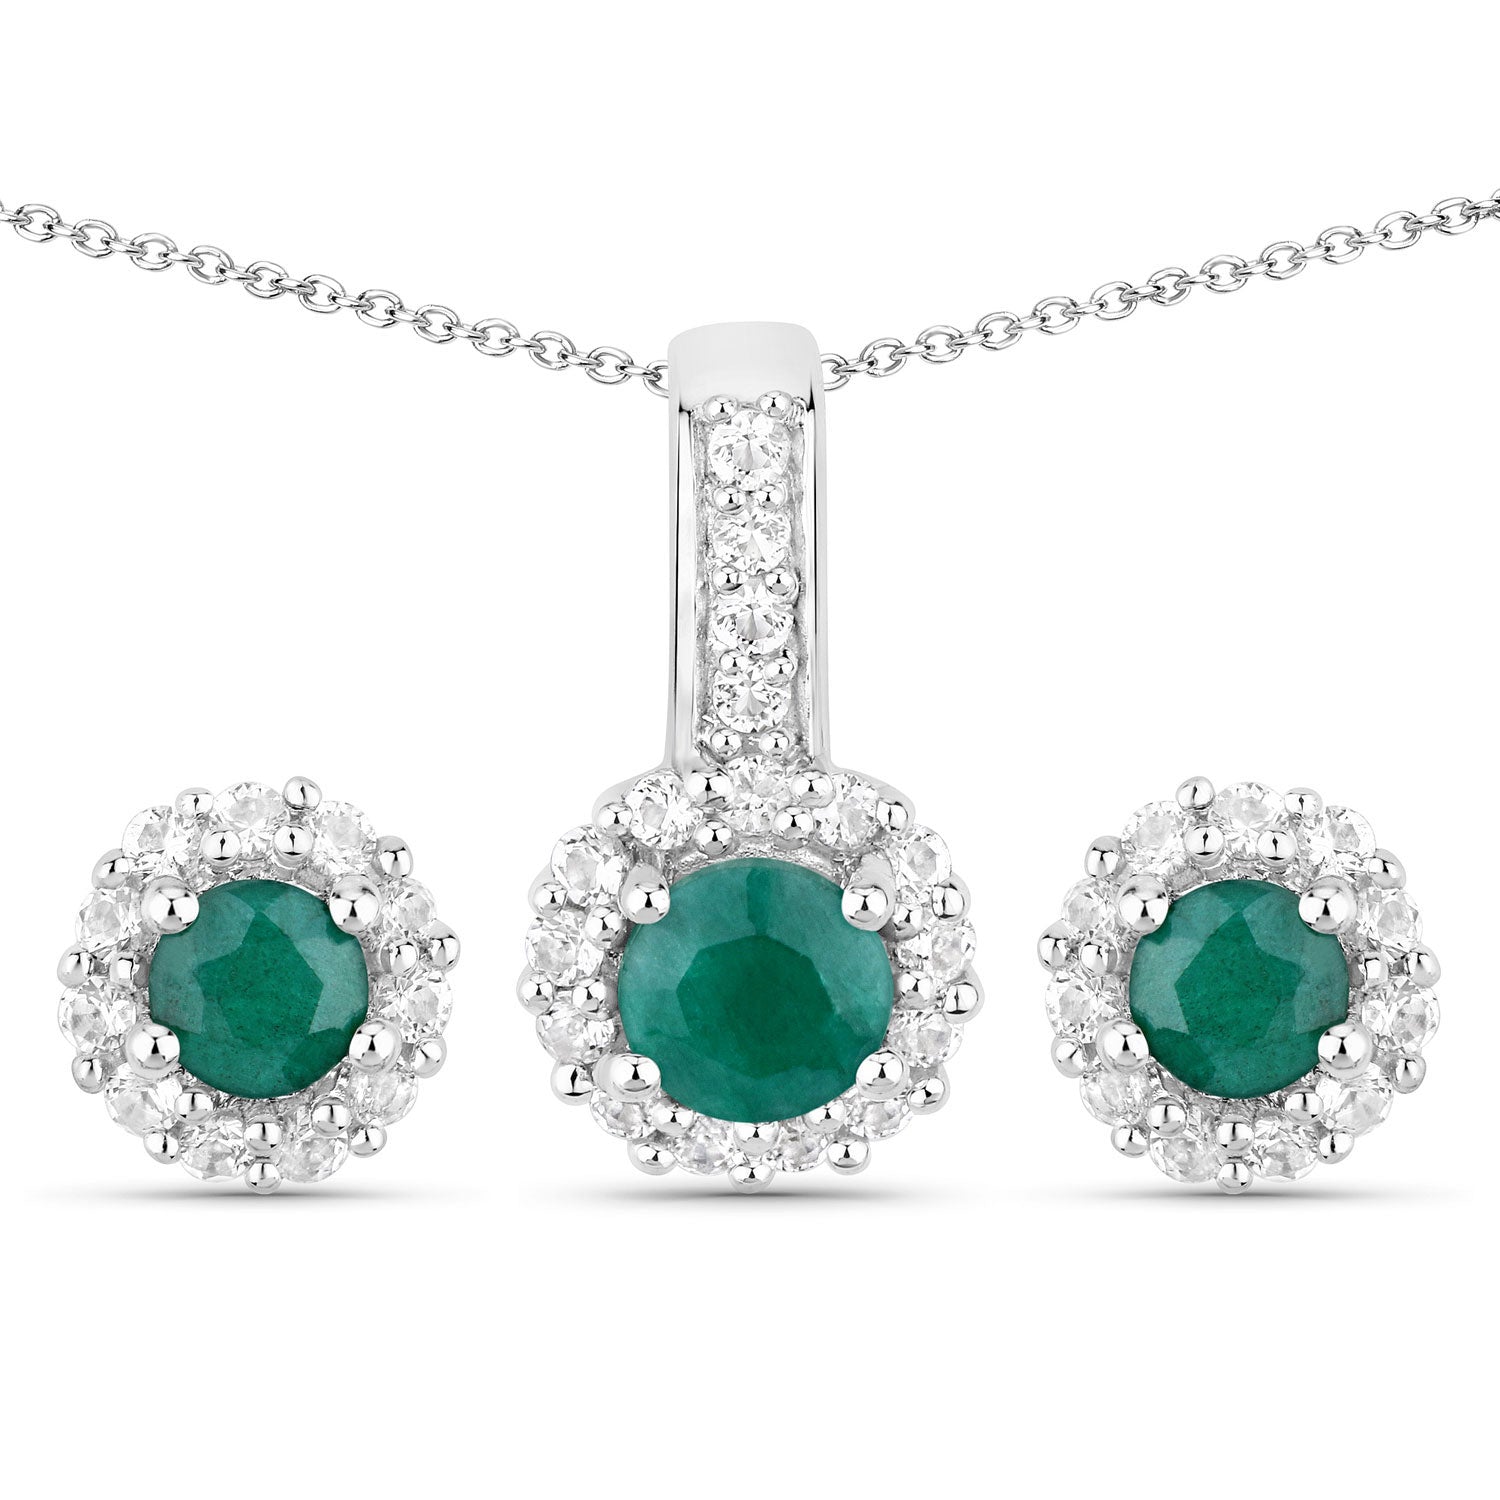 1.81 Carat Dyed Emerald and White Topaz .925 Sterling Silver Jewelry Set